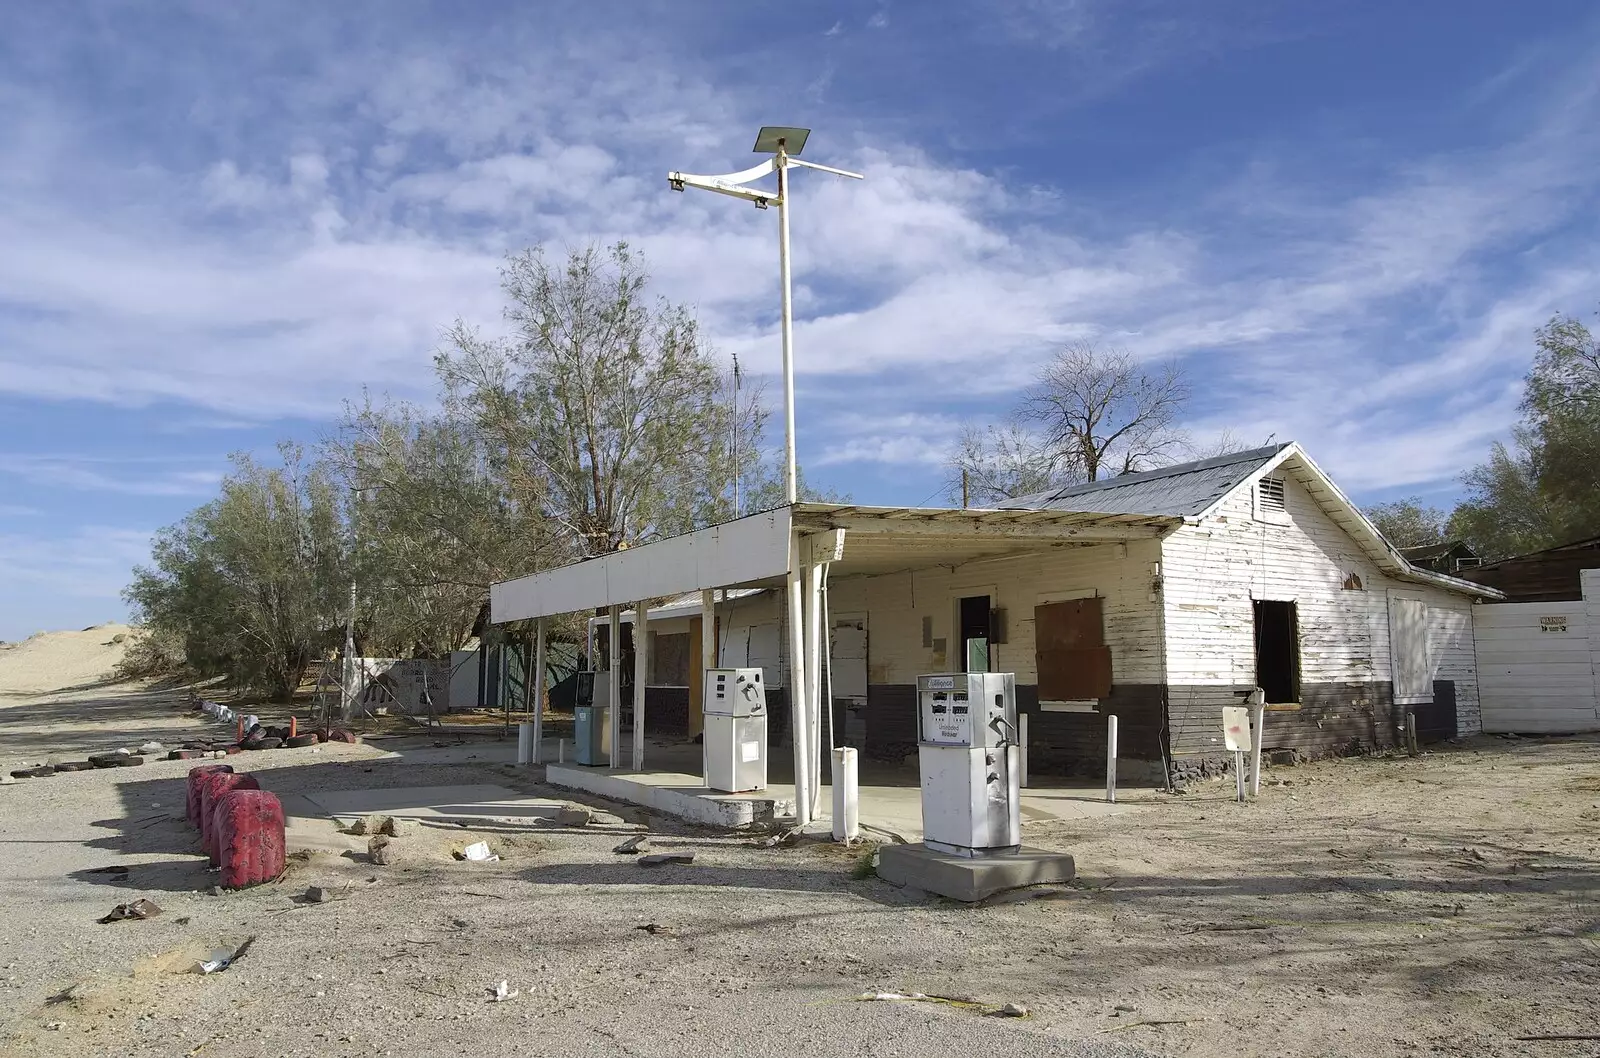 Derelict petrol station at Burro Bend, from The End of the World: Julian to the Salton Sea and Back, California, US - 1st March 2008